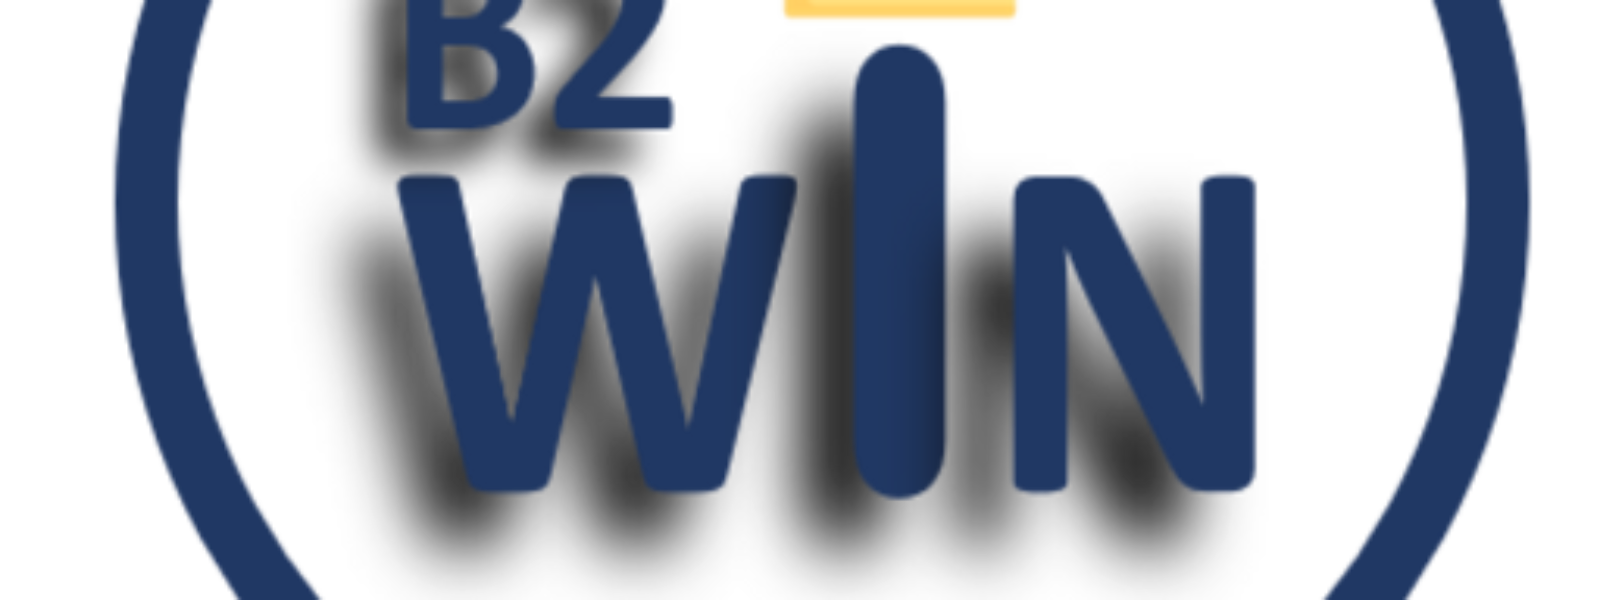 B2win – Winning All Your Bets pentru Android | iOS